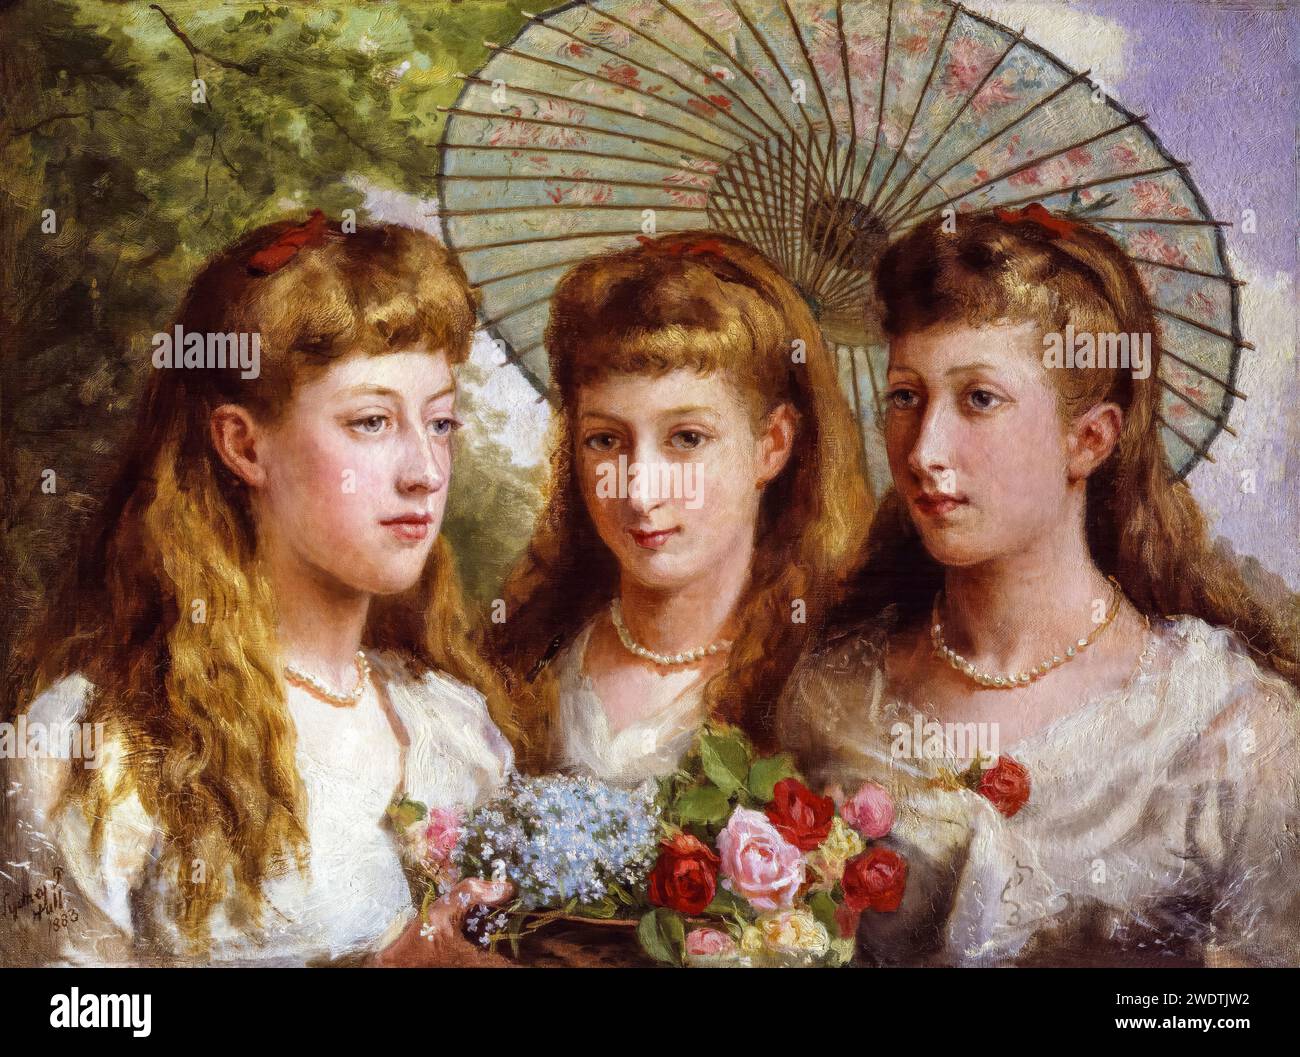 The three daughters of King Edward VII and Queen Alexandra, portrait painting in oil on canvas by Sydney Prior Hall, 1883 Stock Photo